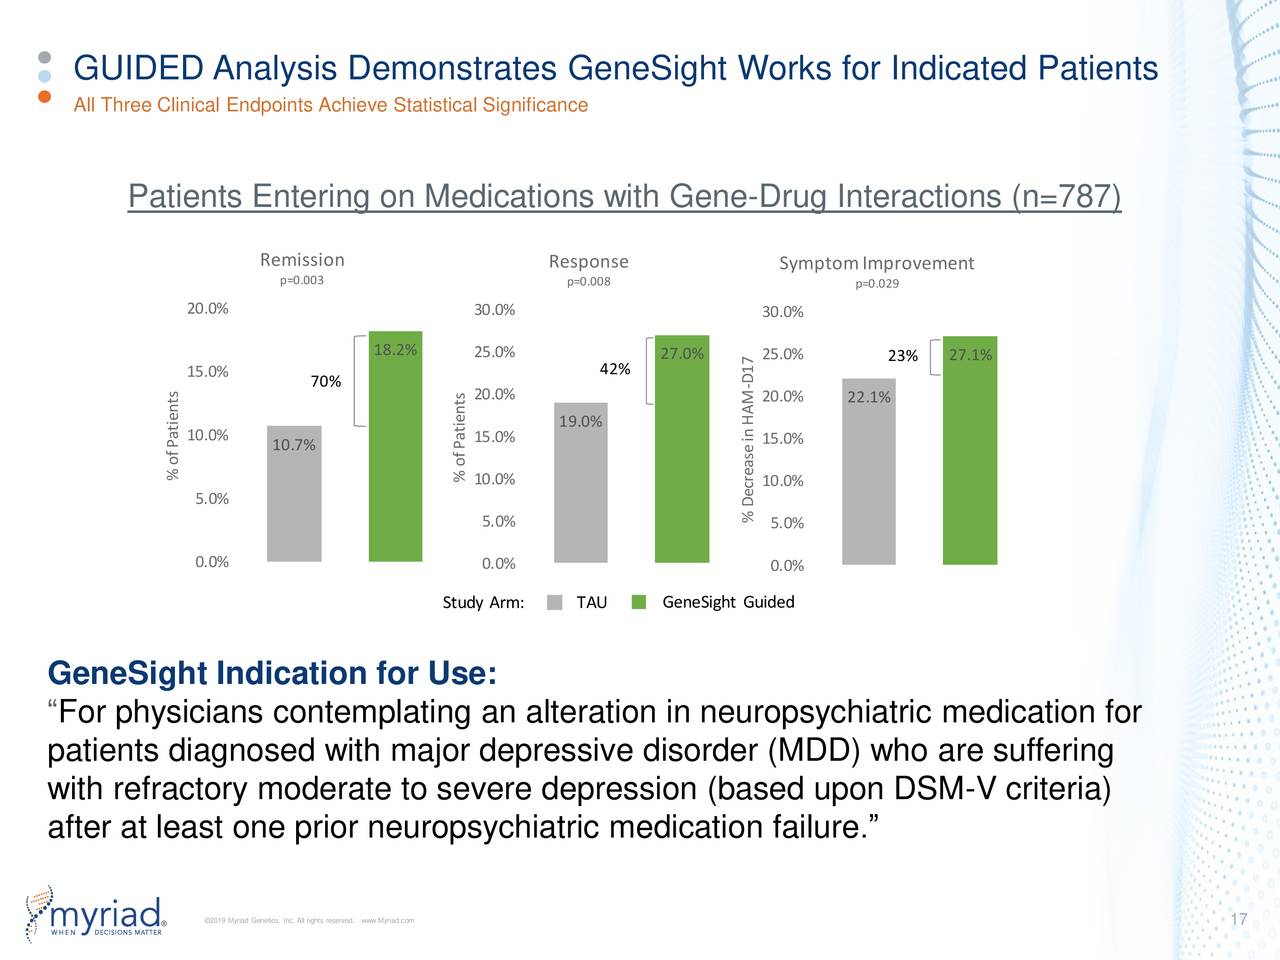 GUIDED Analysis Demonstrates GeneSight Works for Indicated Patients